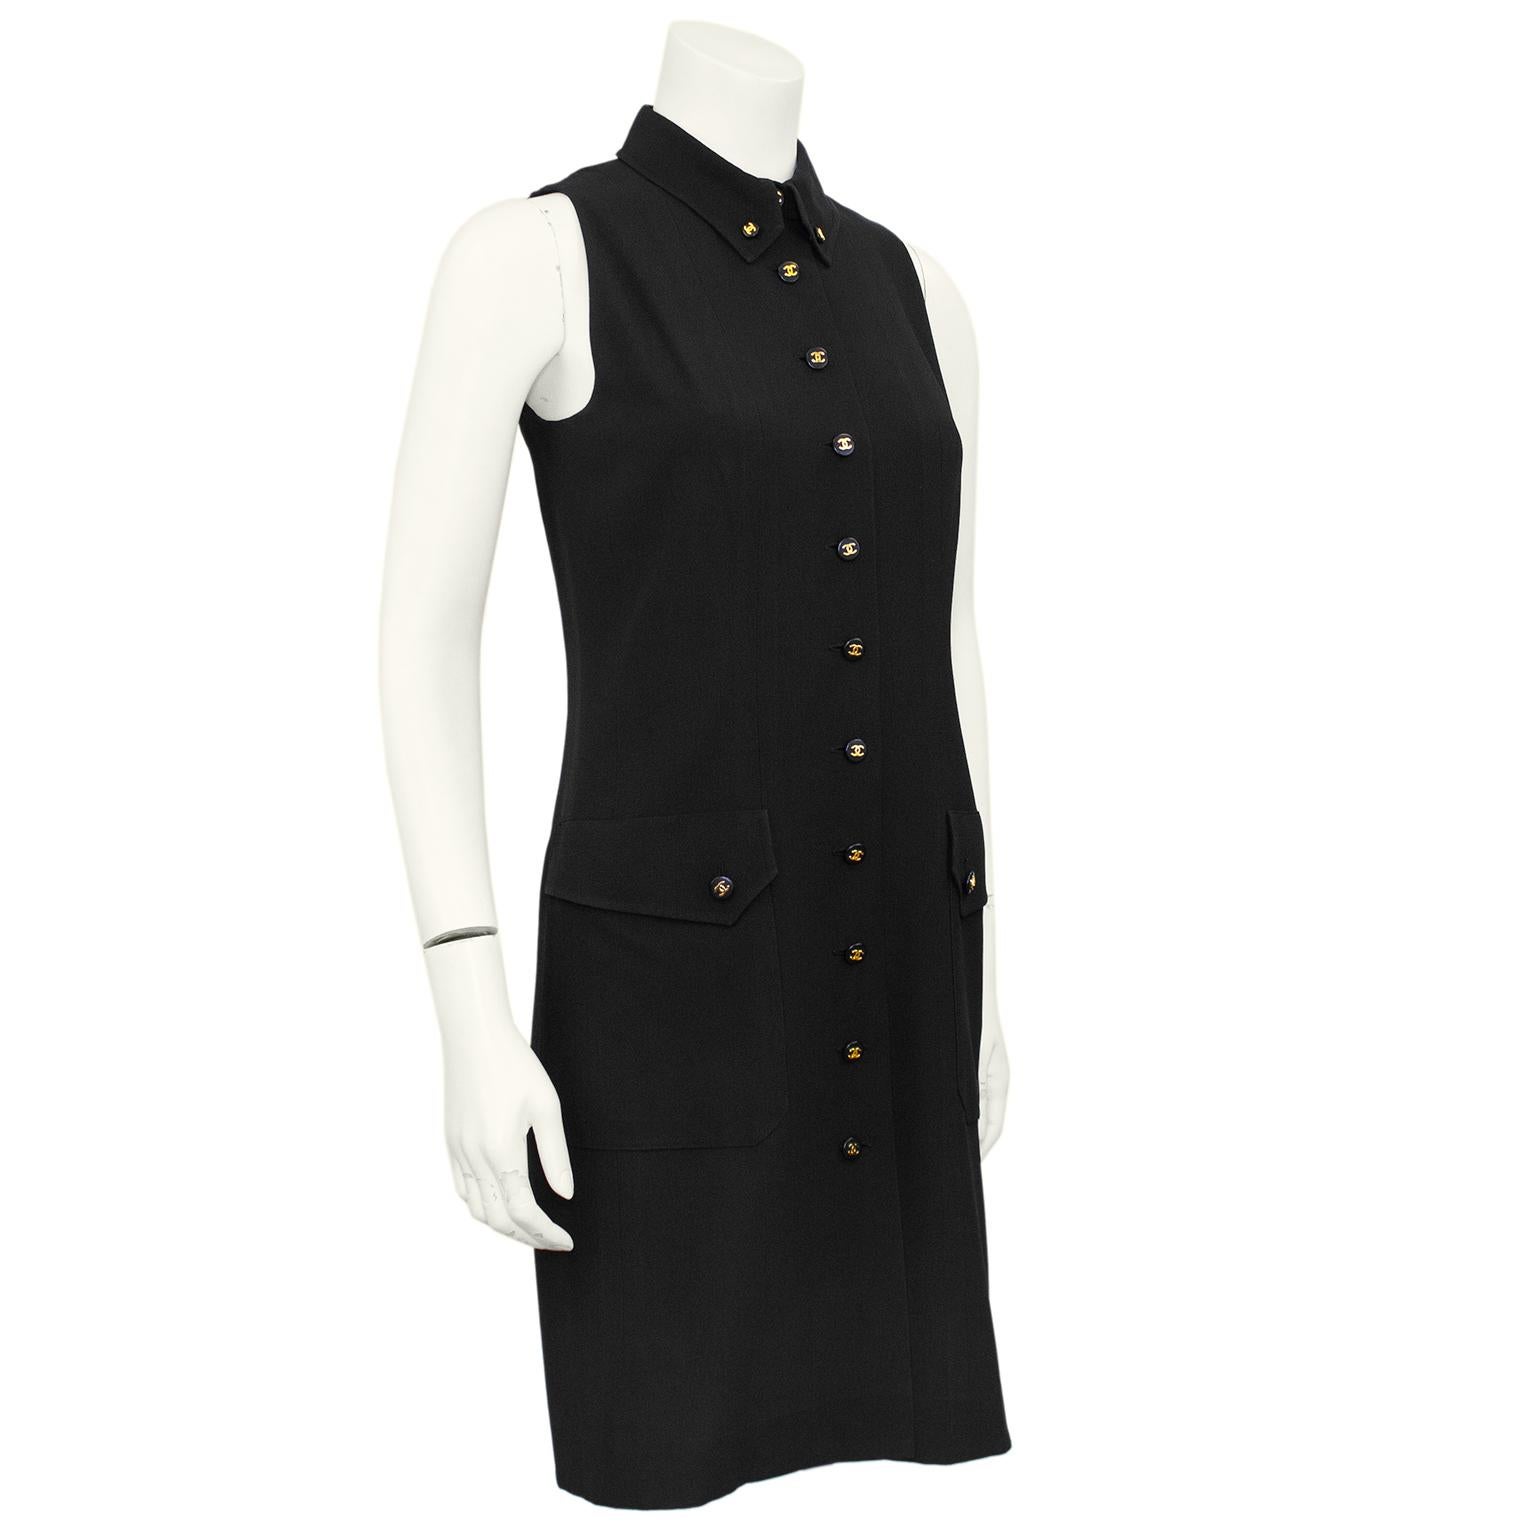 A classic and sleek Chanel sleeveless shirtdress from Spring 1997. Black crepe with small black and gold interlocking CC logo buttons down the centre front and on the large patch flap pockets. Black Chanel logo silk lining. Timeless and elegant, can